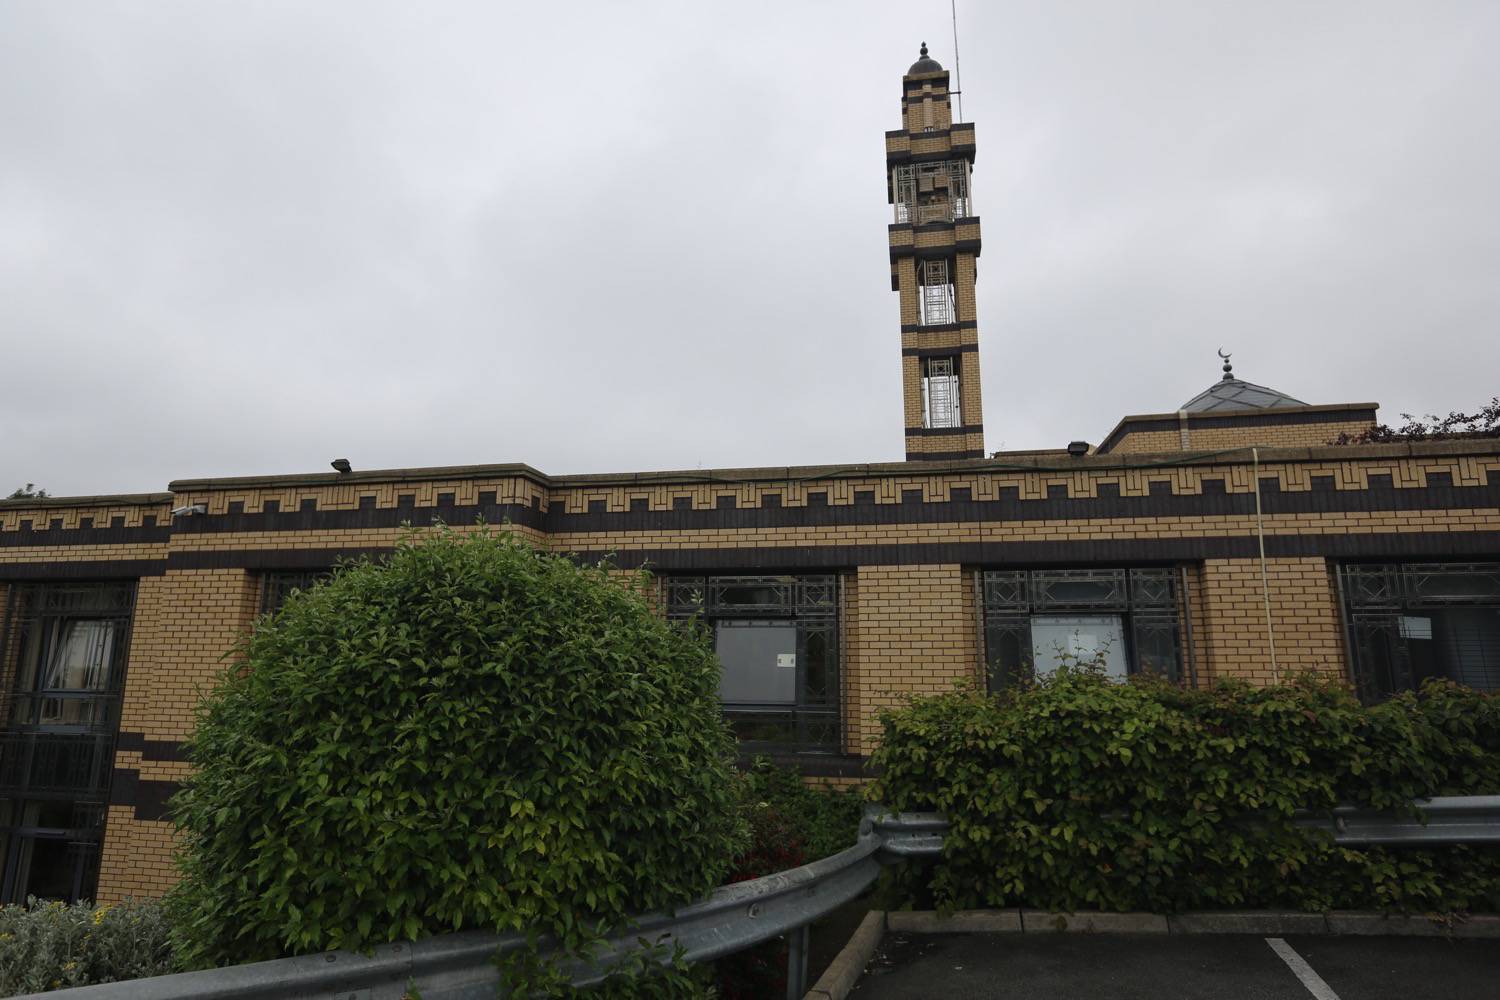 View of the minaret from the south parking